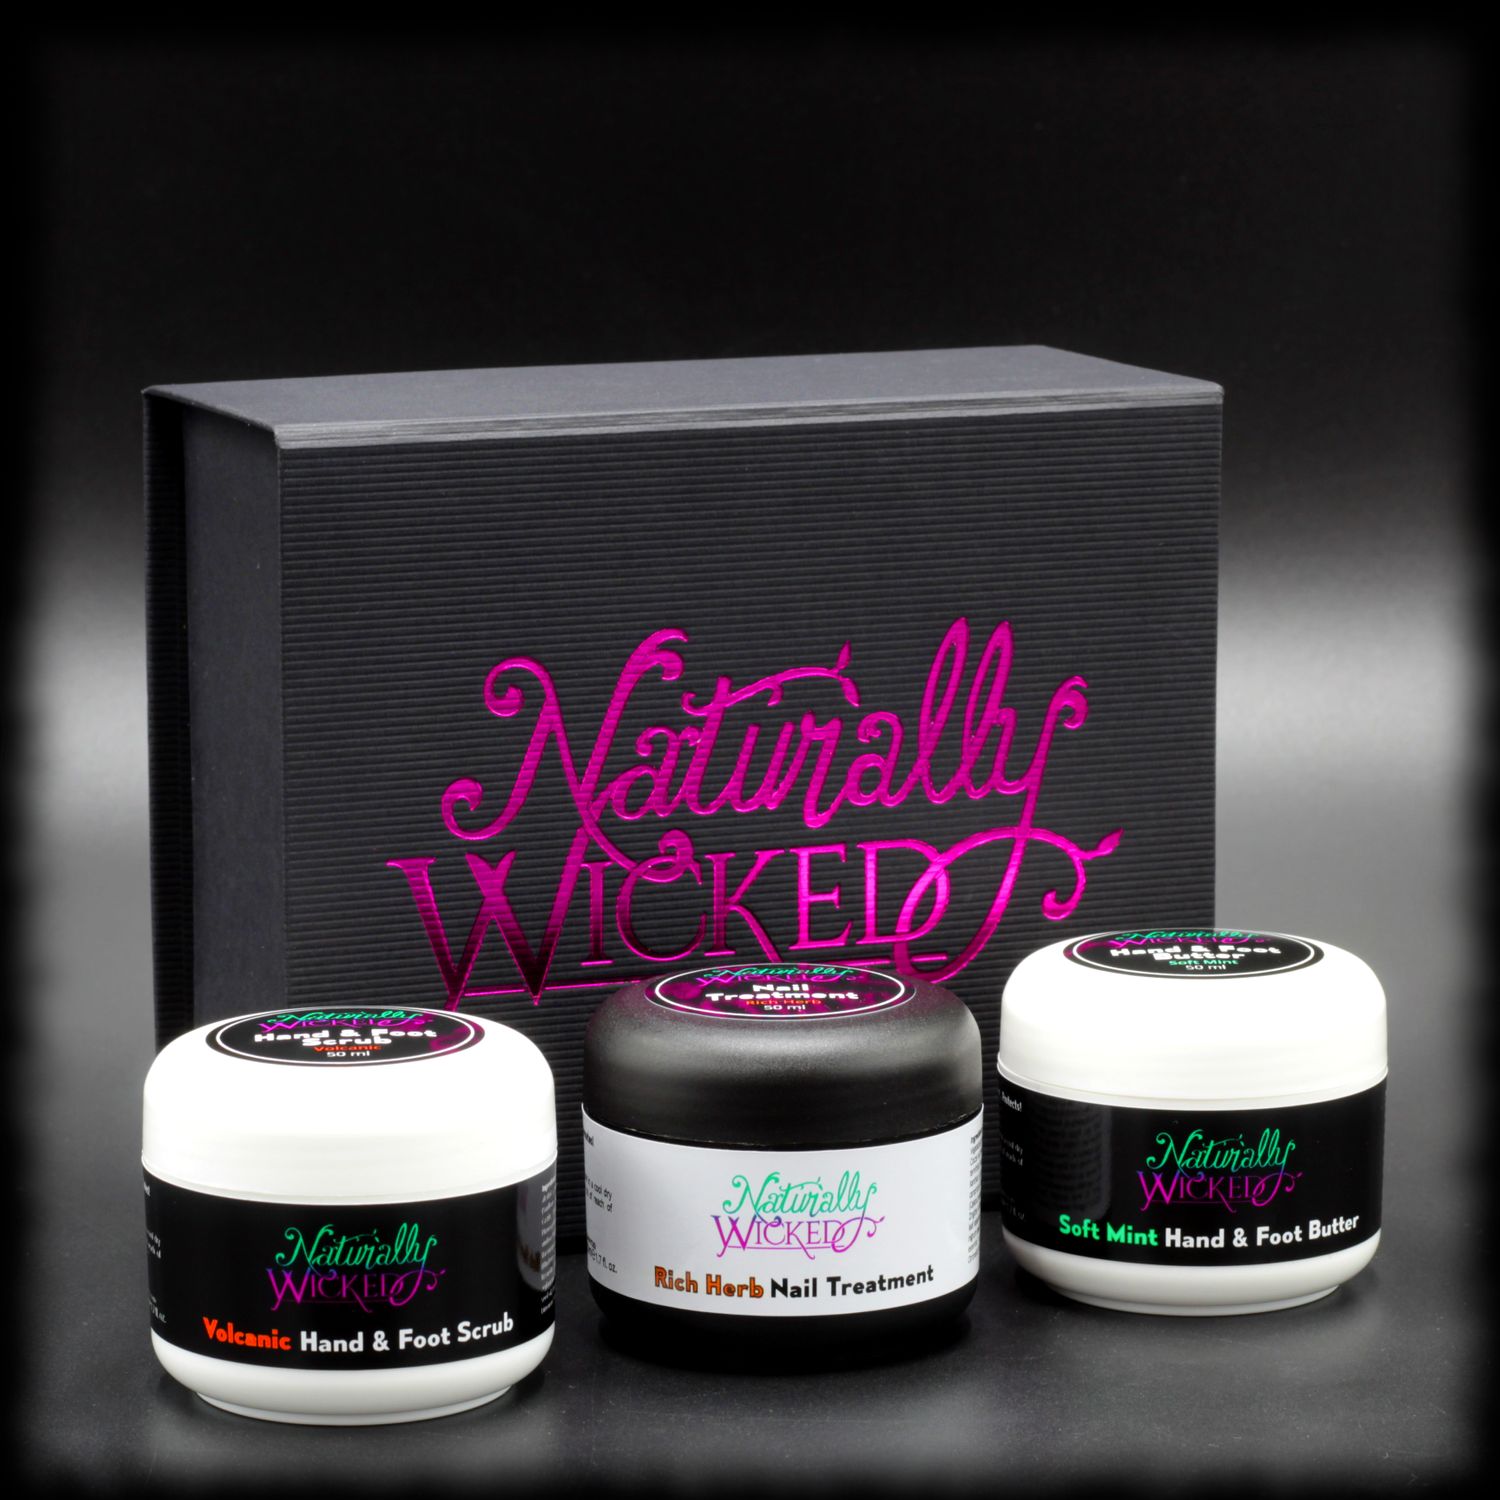 Naturally Wicked Original 3 Step Hand & Foot Kit With Volcanic Hand & Foot Scrub, Rich Herb Nail Treatment & Soft Mint Hand & Foot Butter In Front Of Original Black & Pink Box